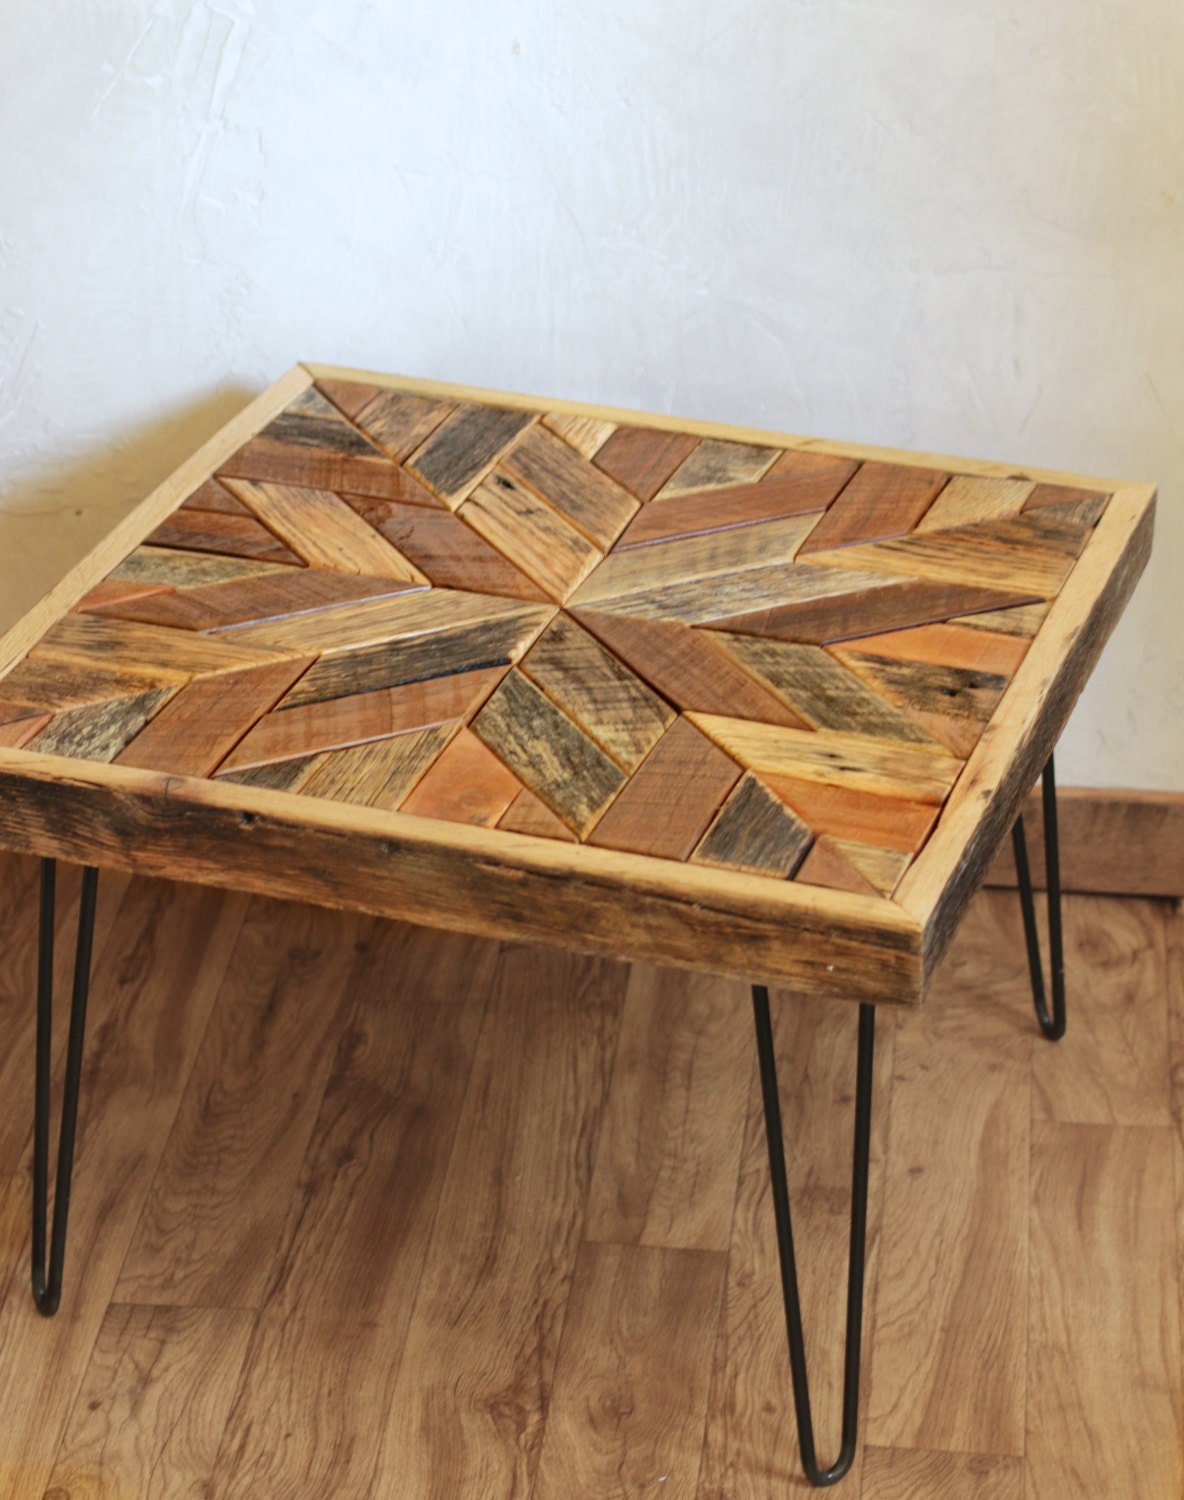 Woodworking patterns for tables Main Image